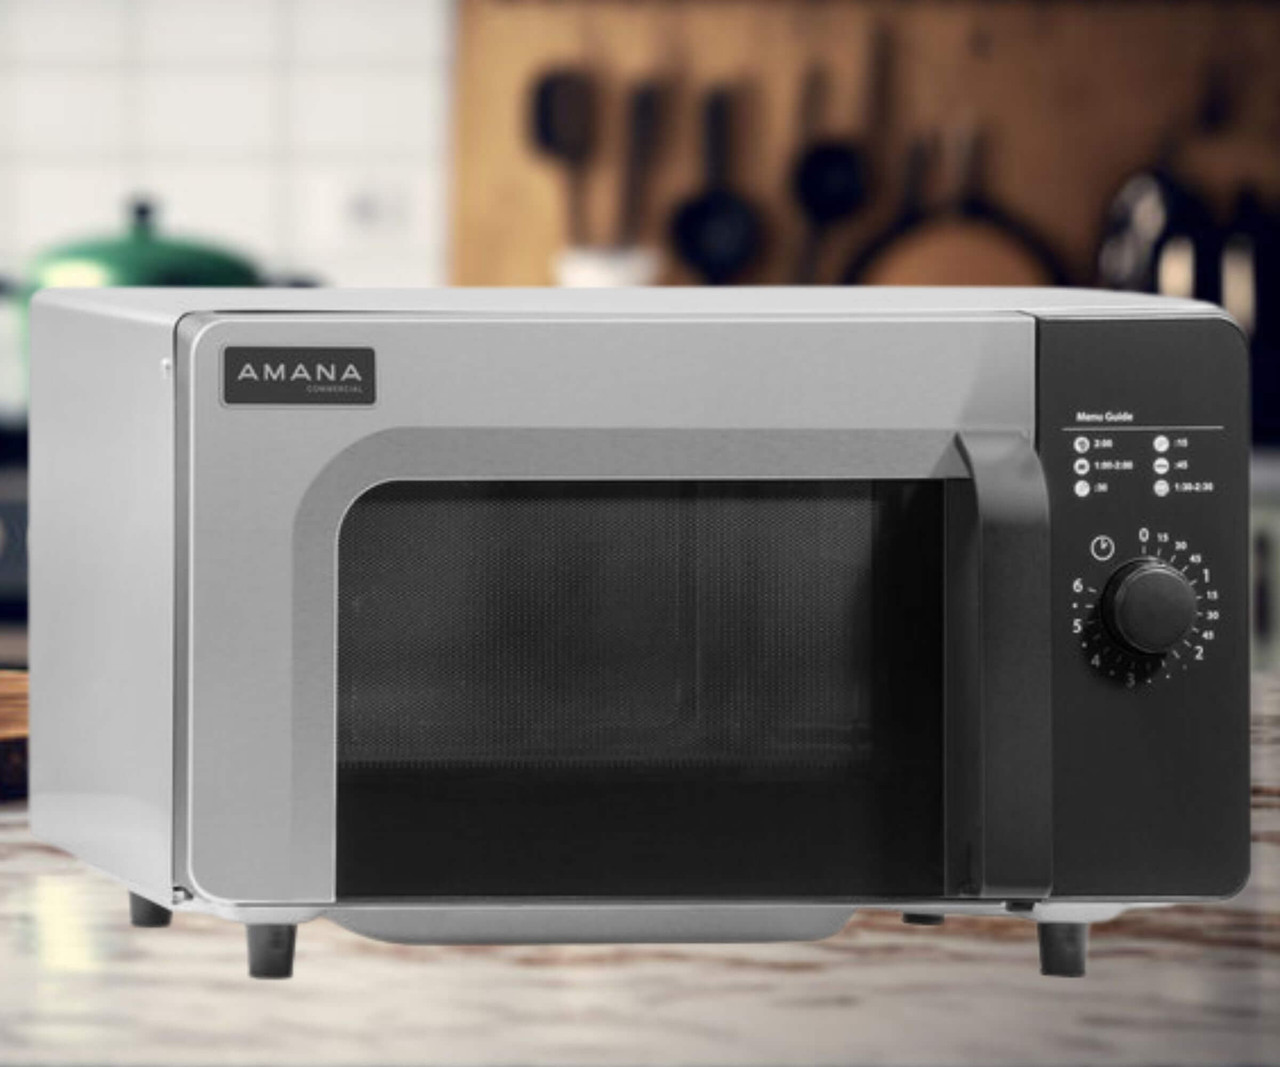 Amana Stainless Steel Commercial Microwave - 120V, 1000W | Reliable Cooking with Dial Controls